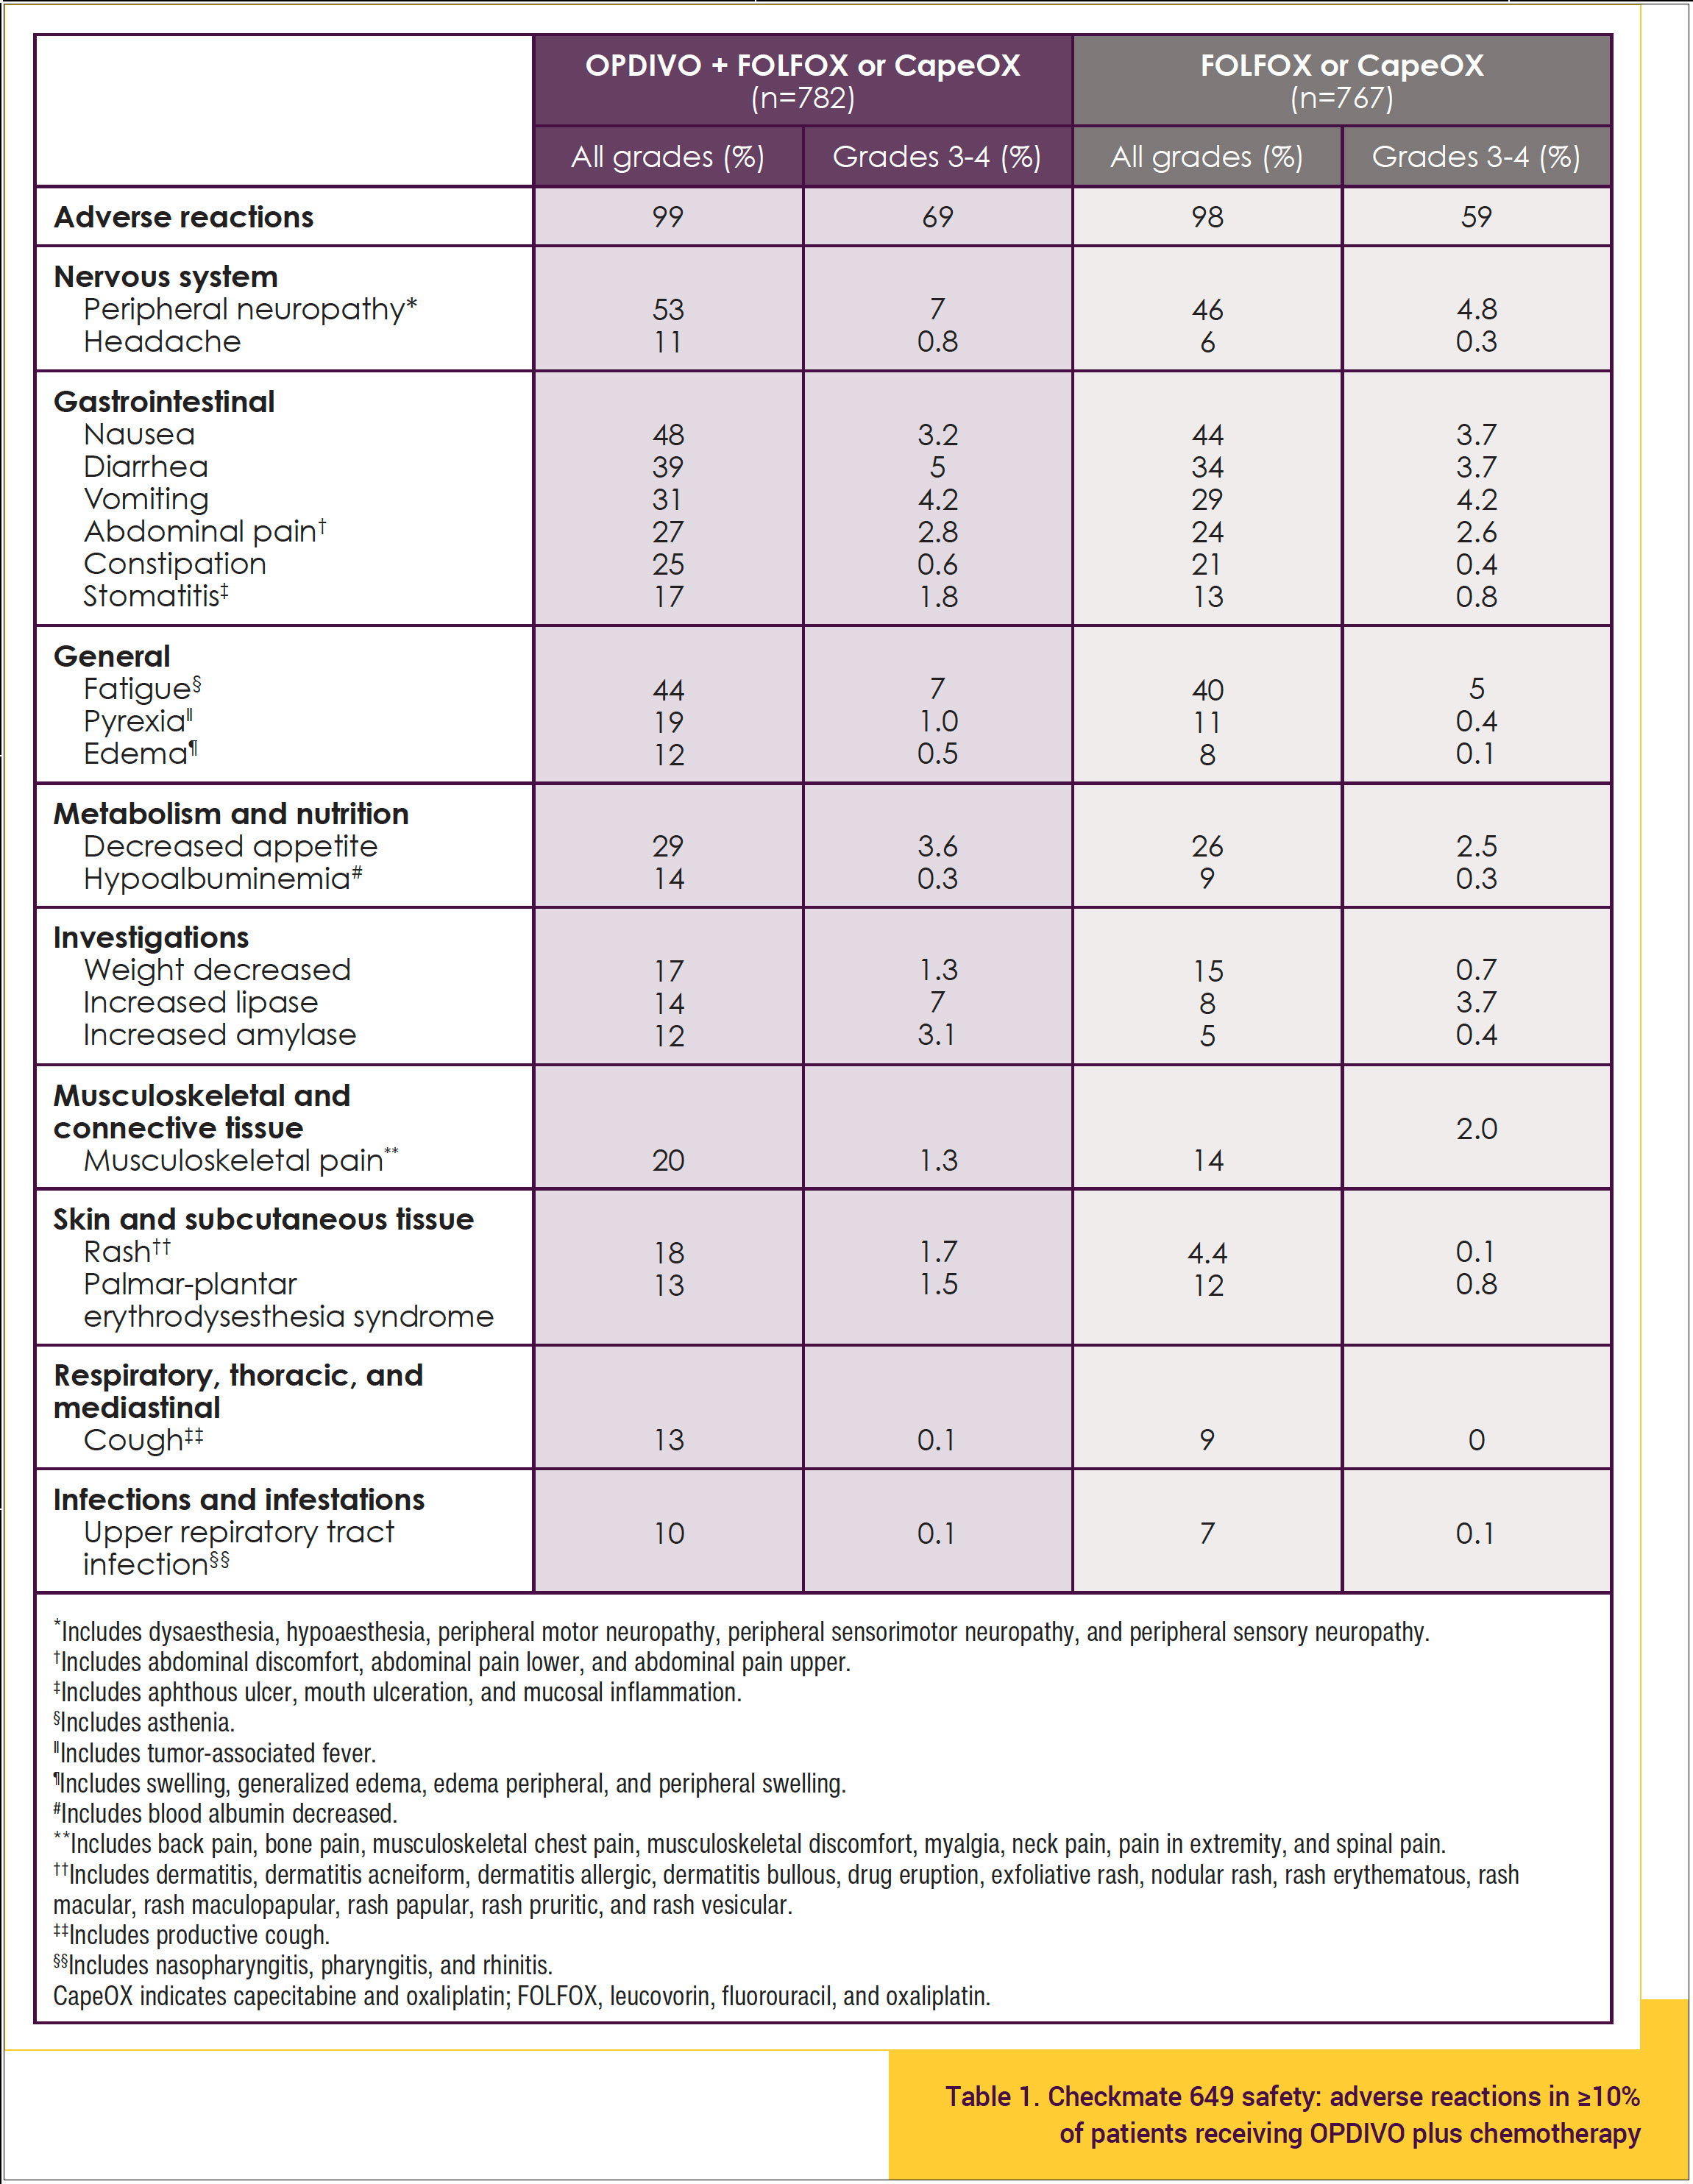 Table 1. Checkmate 649 safety: adverse reactions in ≥10% of patients receiving OPDIVO plus chemotherapy